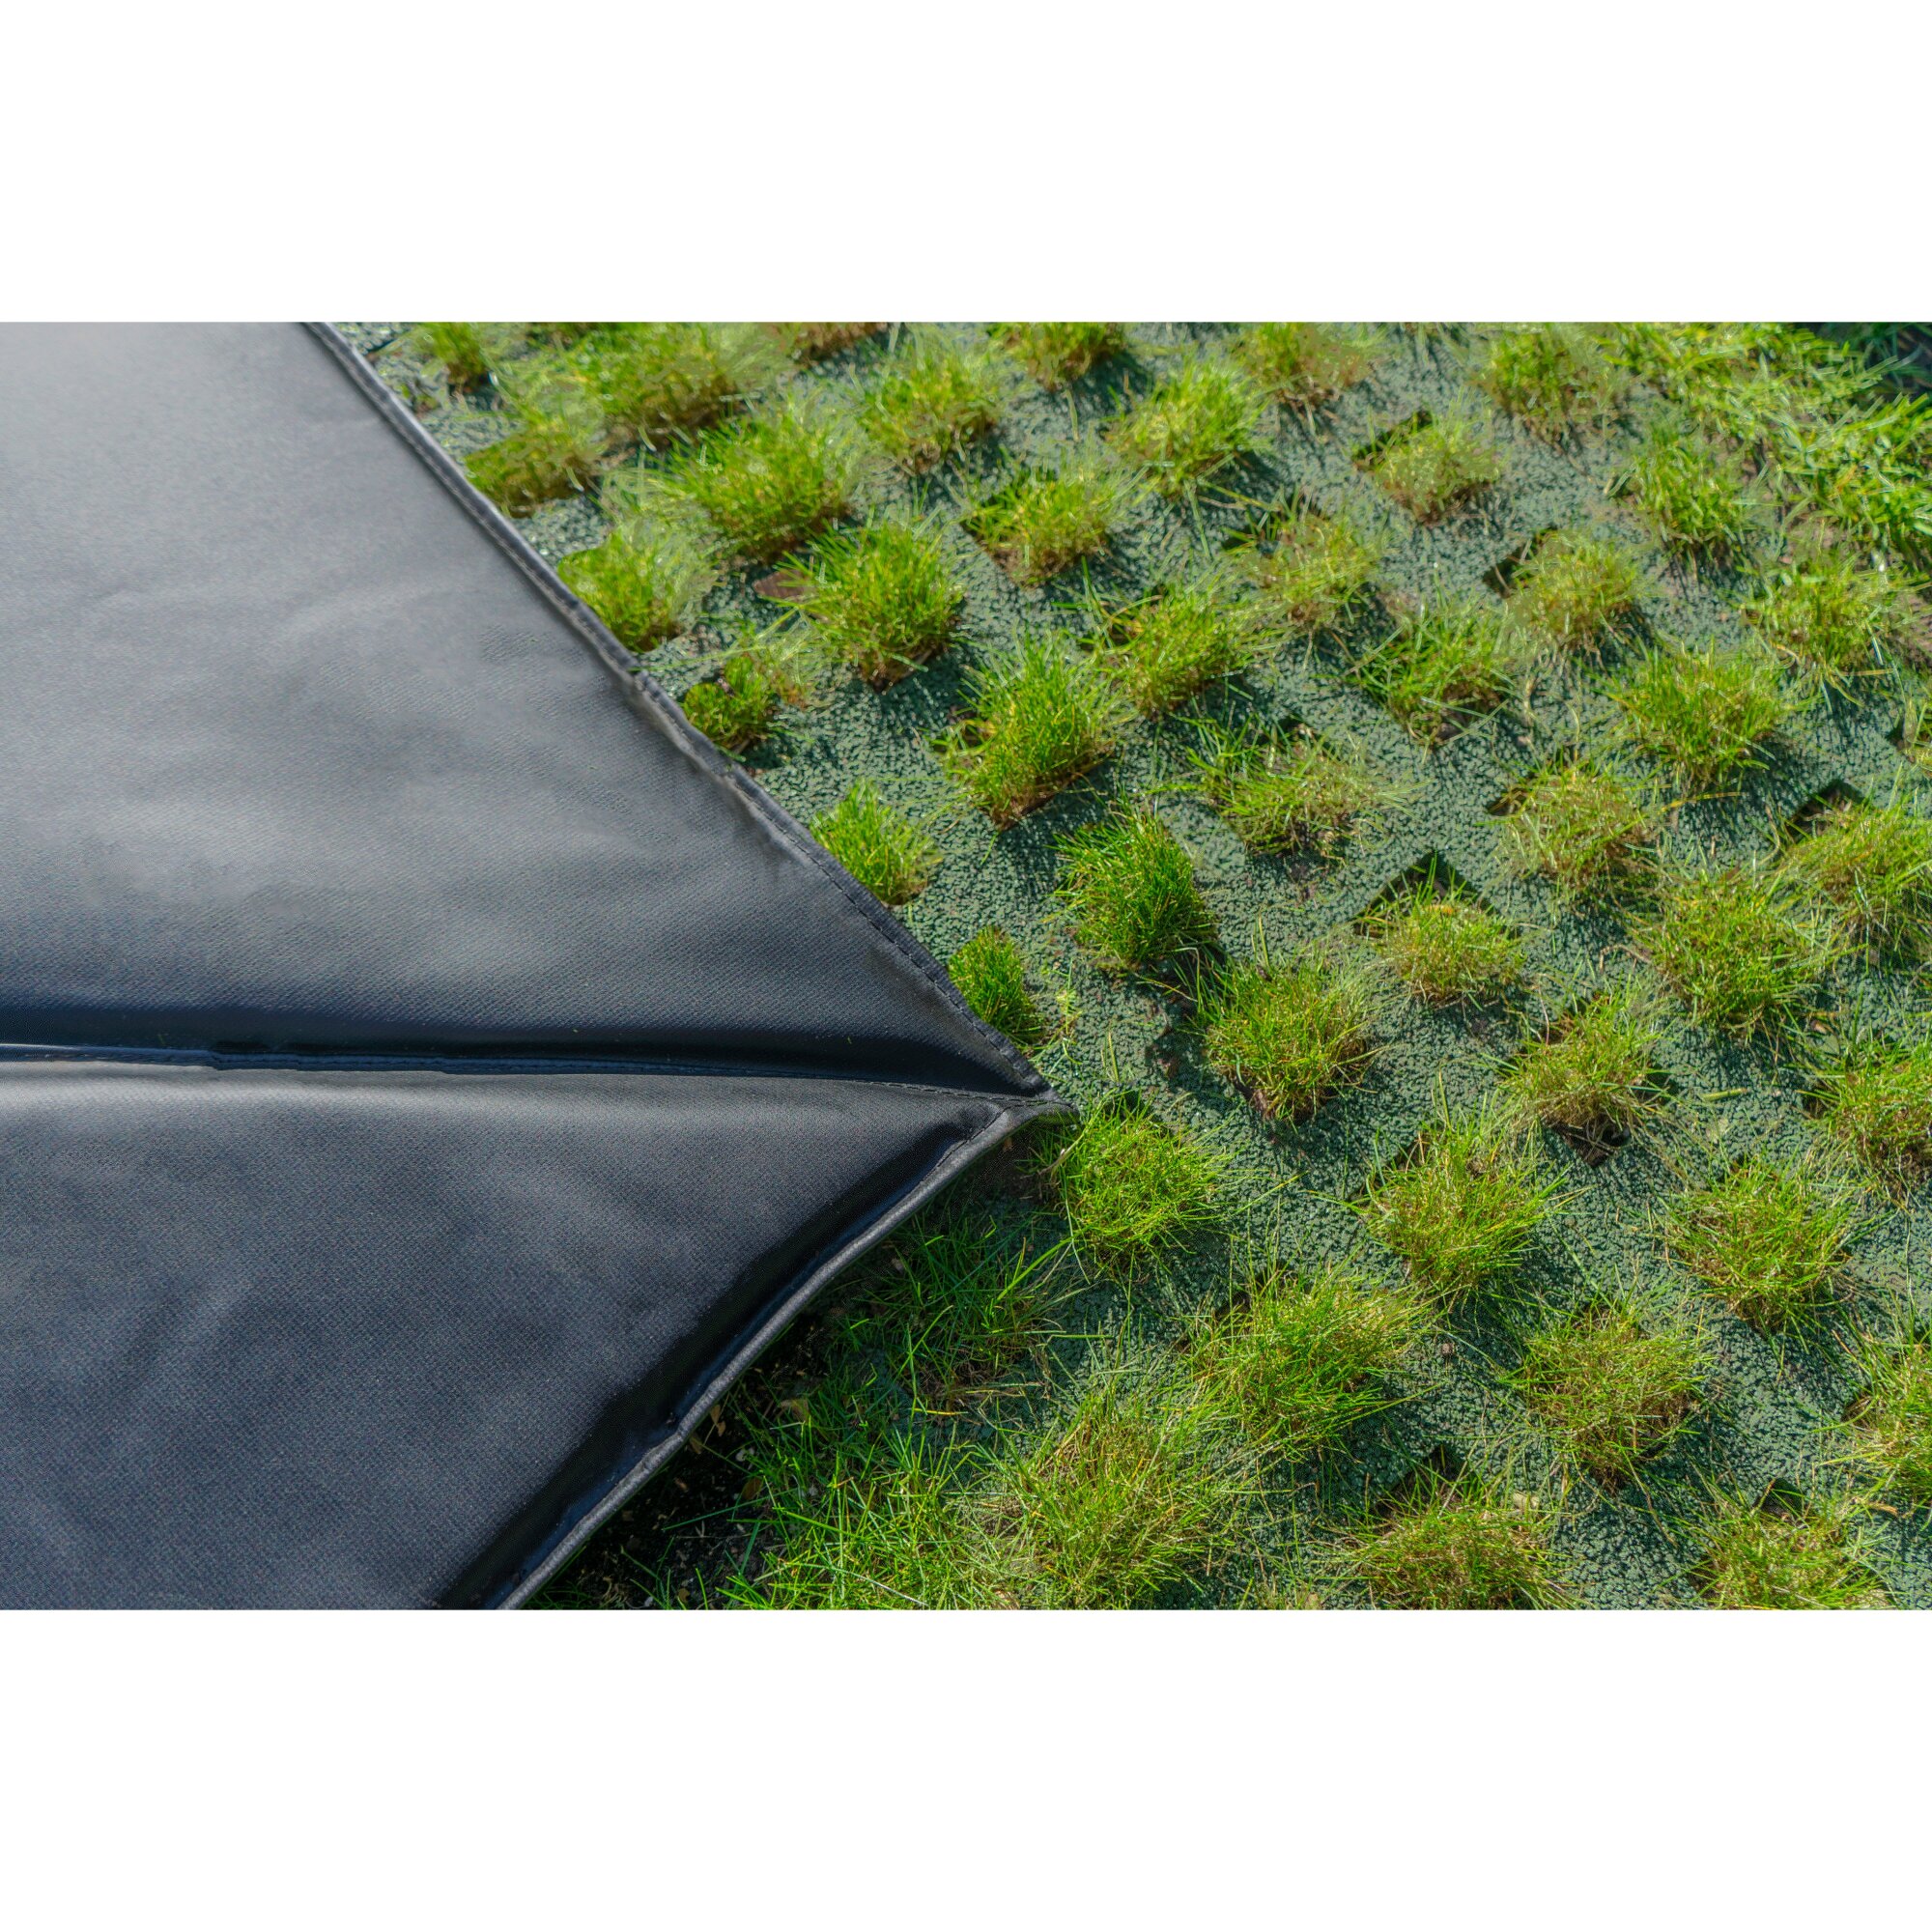 EXIT Dynamic ground level trampoline 275x458cm with Freezone safety tiles - black